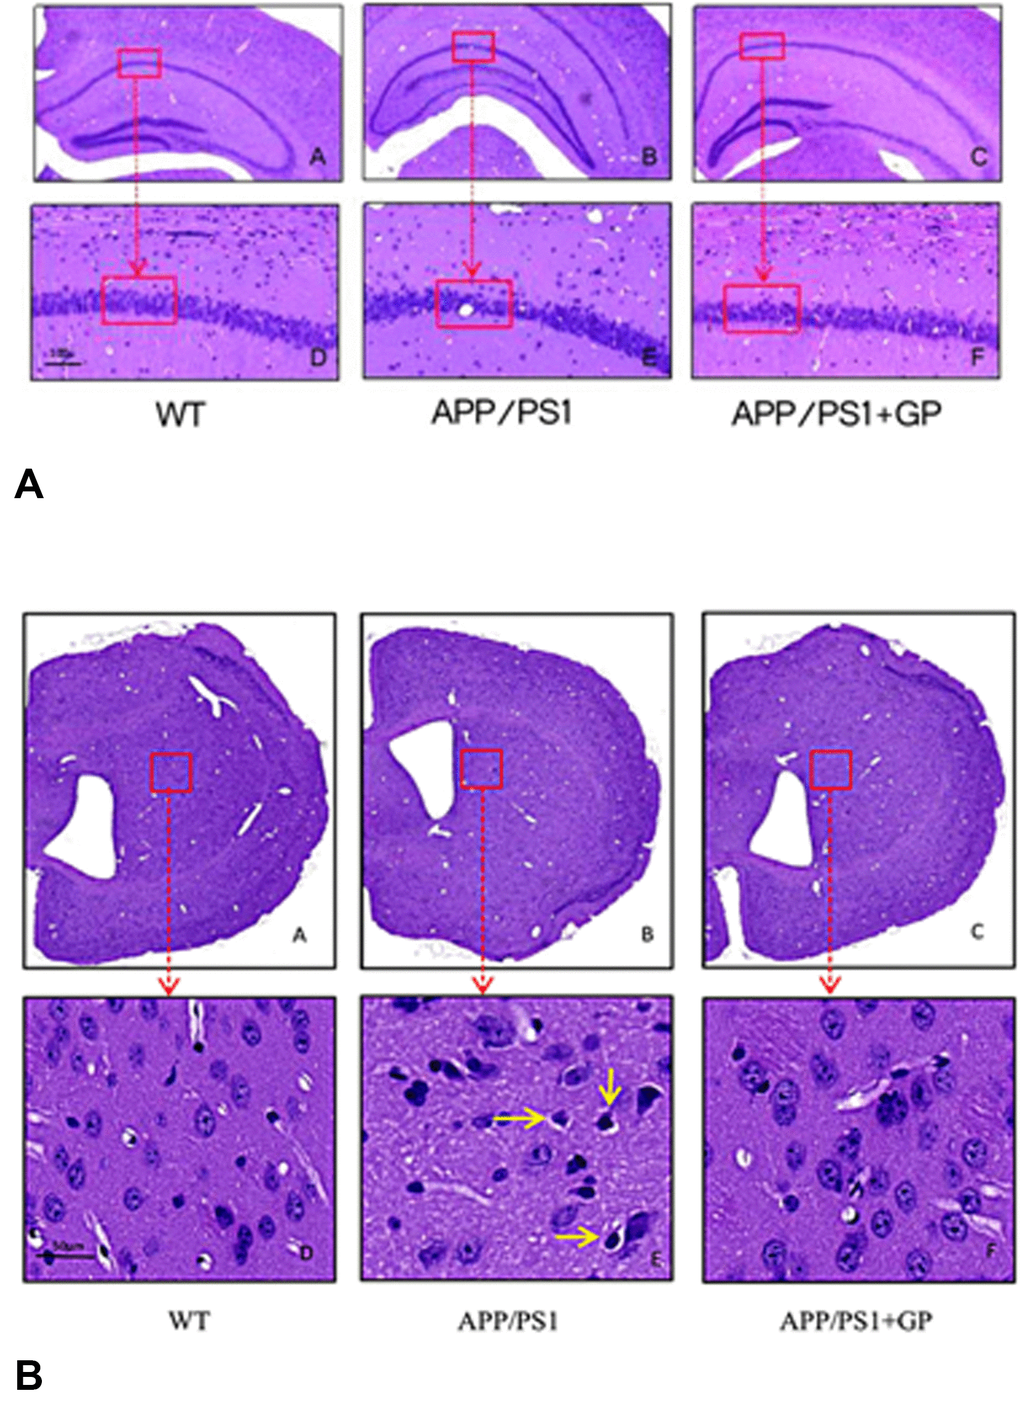 Geniposide ameliorates neuropathological changes in APP/PS1 mice